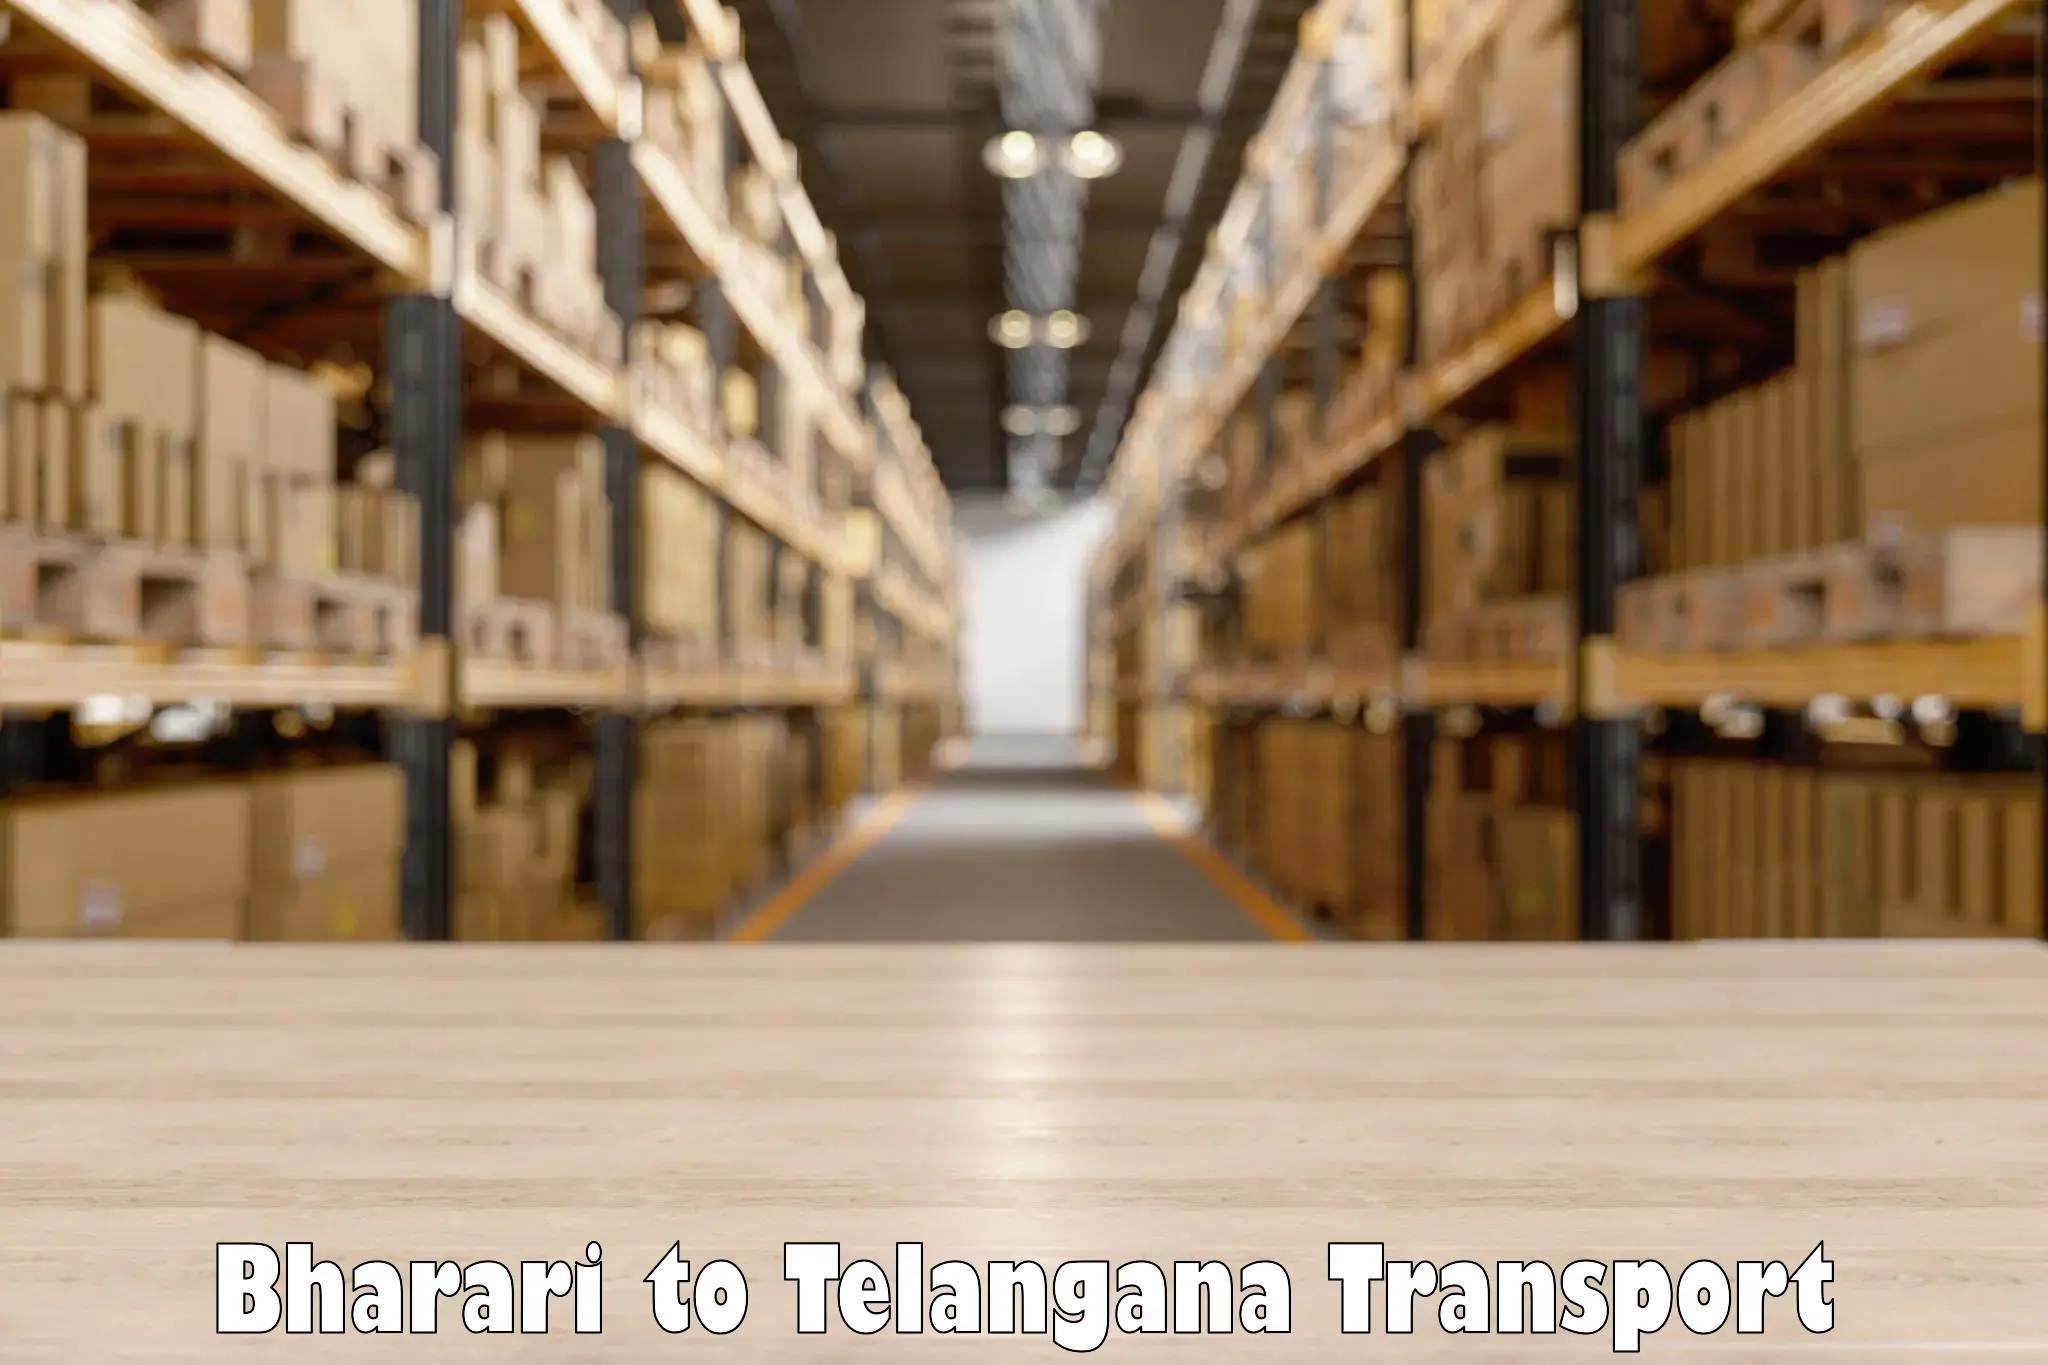 Container transport service Bharari to Netrang